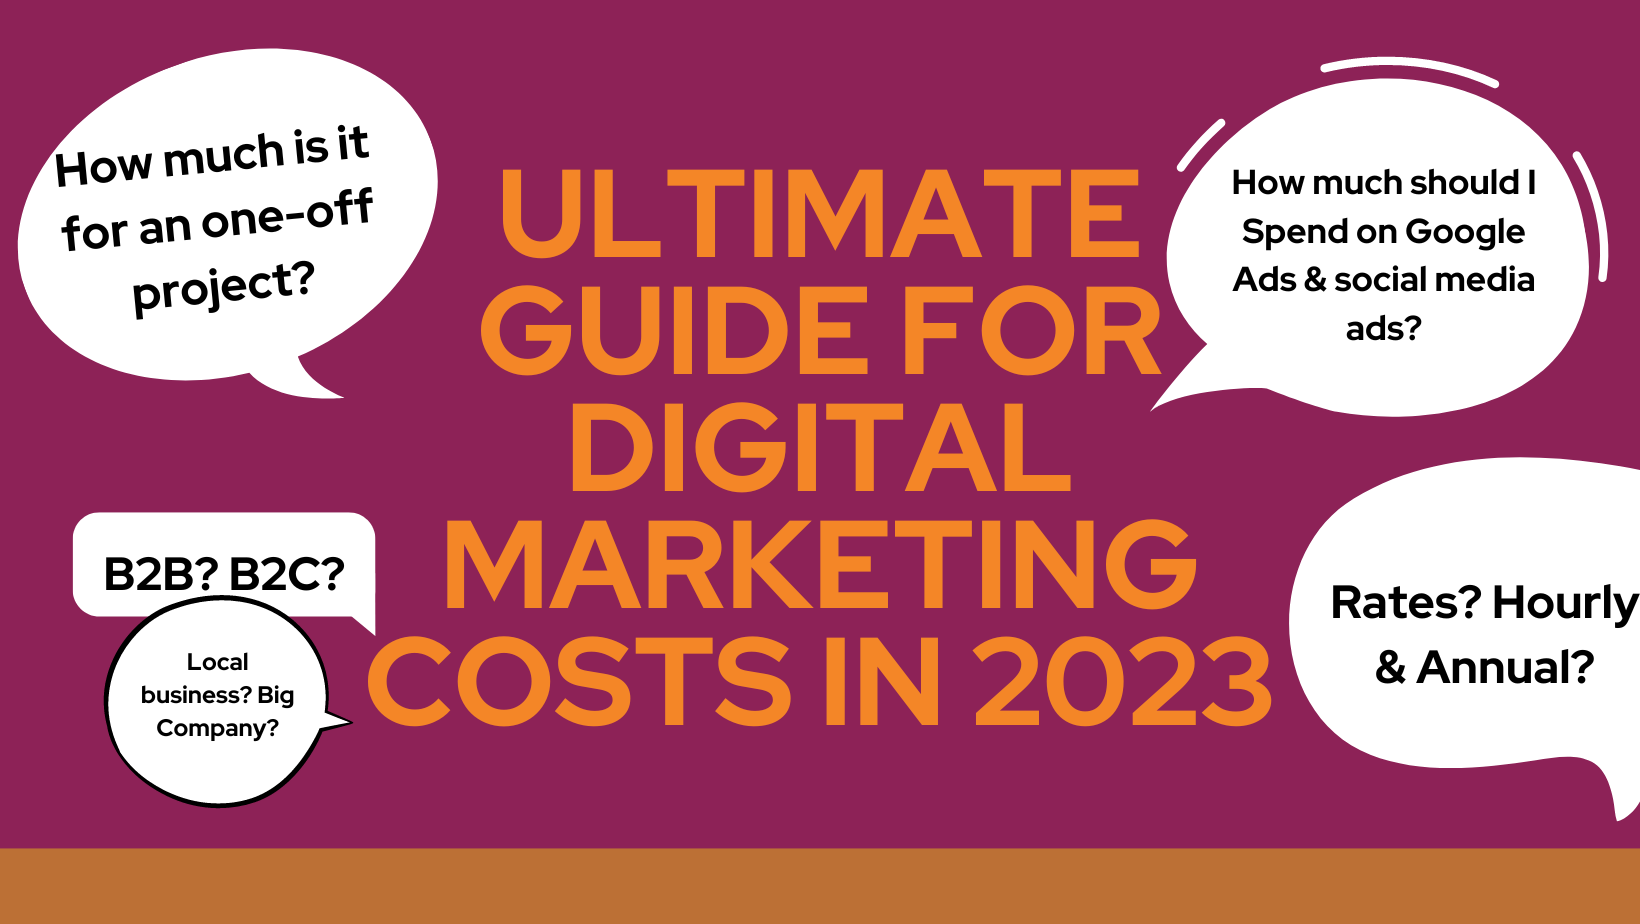 Marketing Agency Digilari discusses how much digital marketing really costs